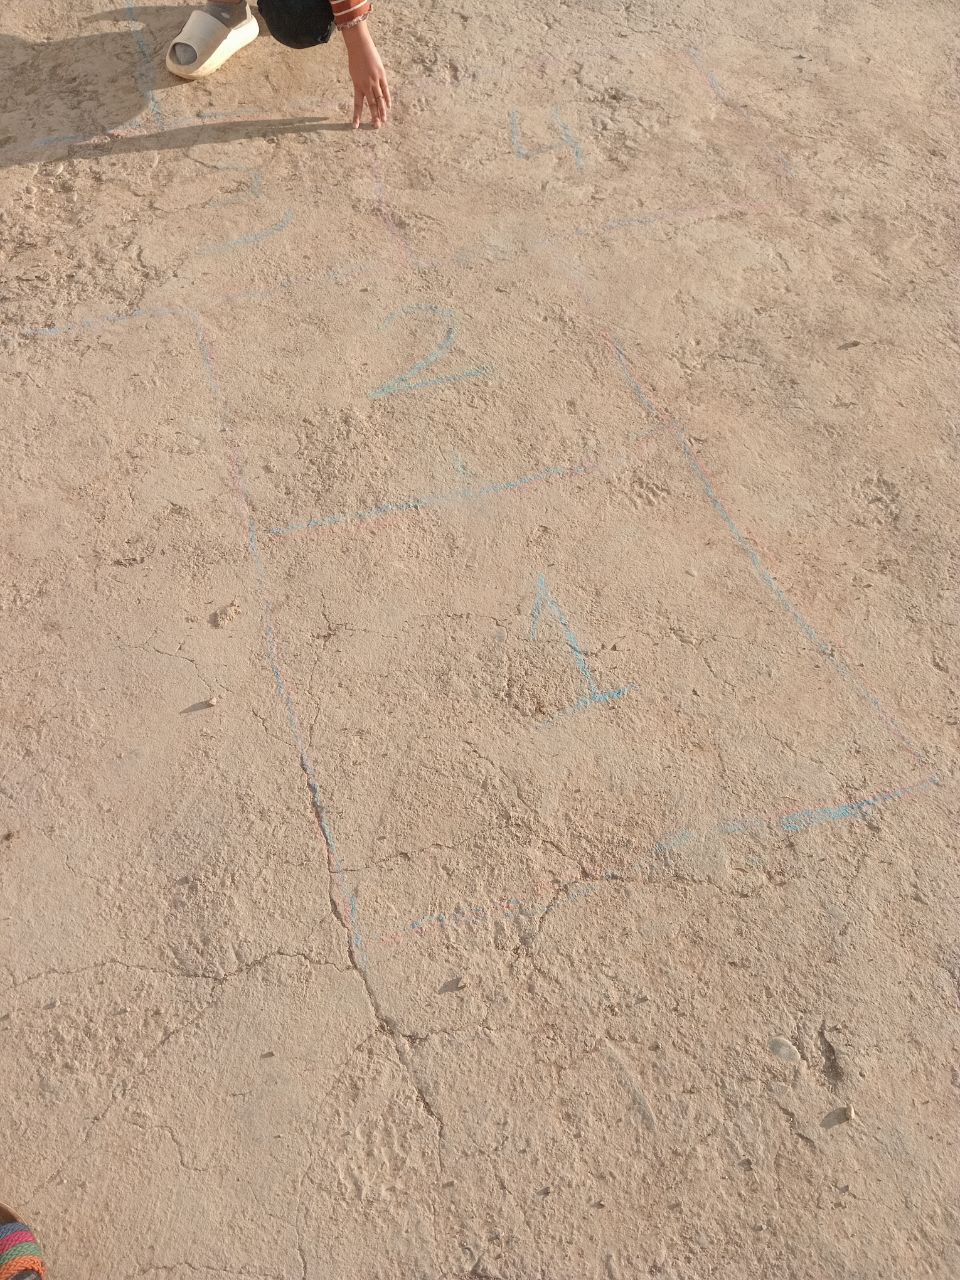 light brown rocky ground with 3 faint blue chalk hopscotch spaces labeled with numbers drawn on it